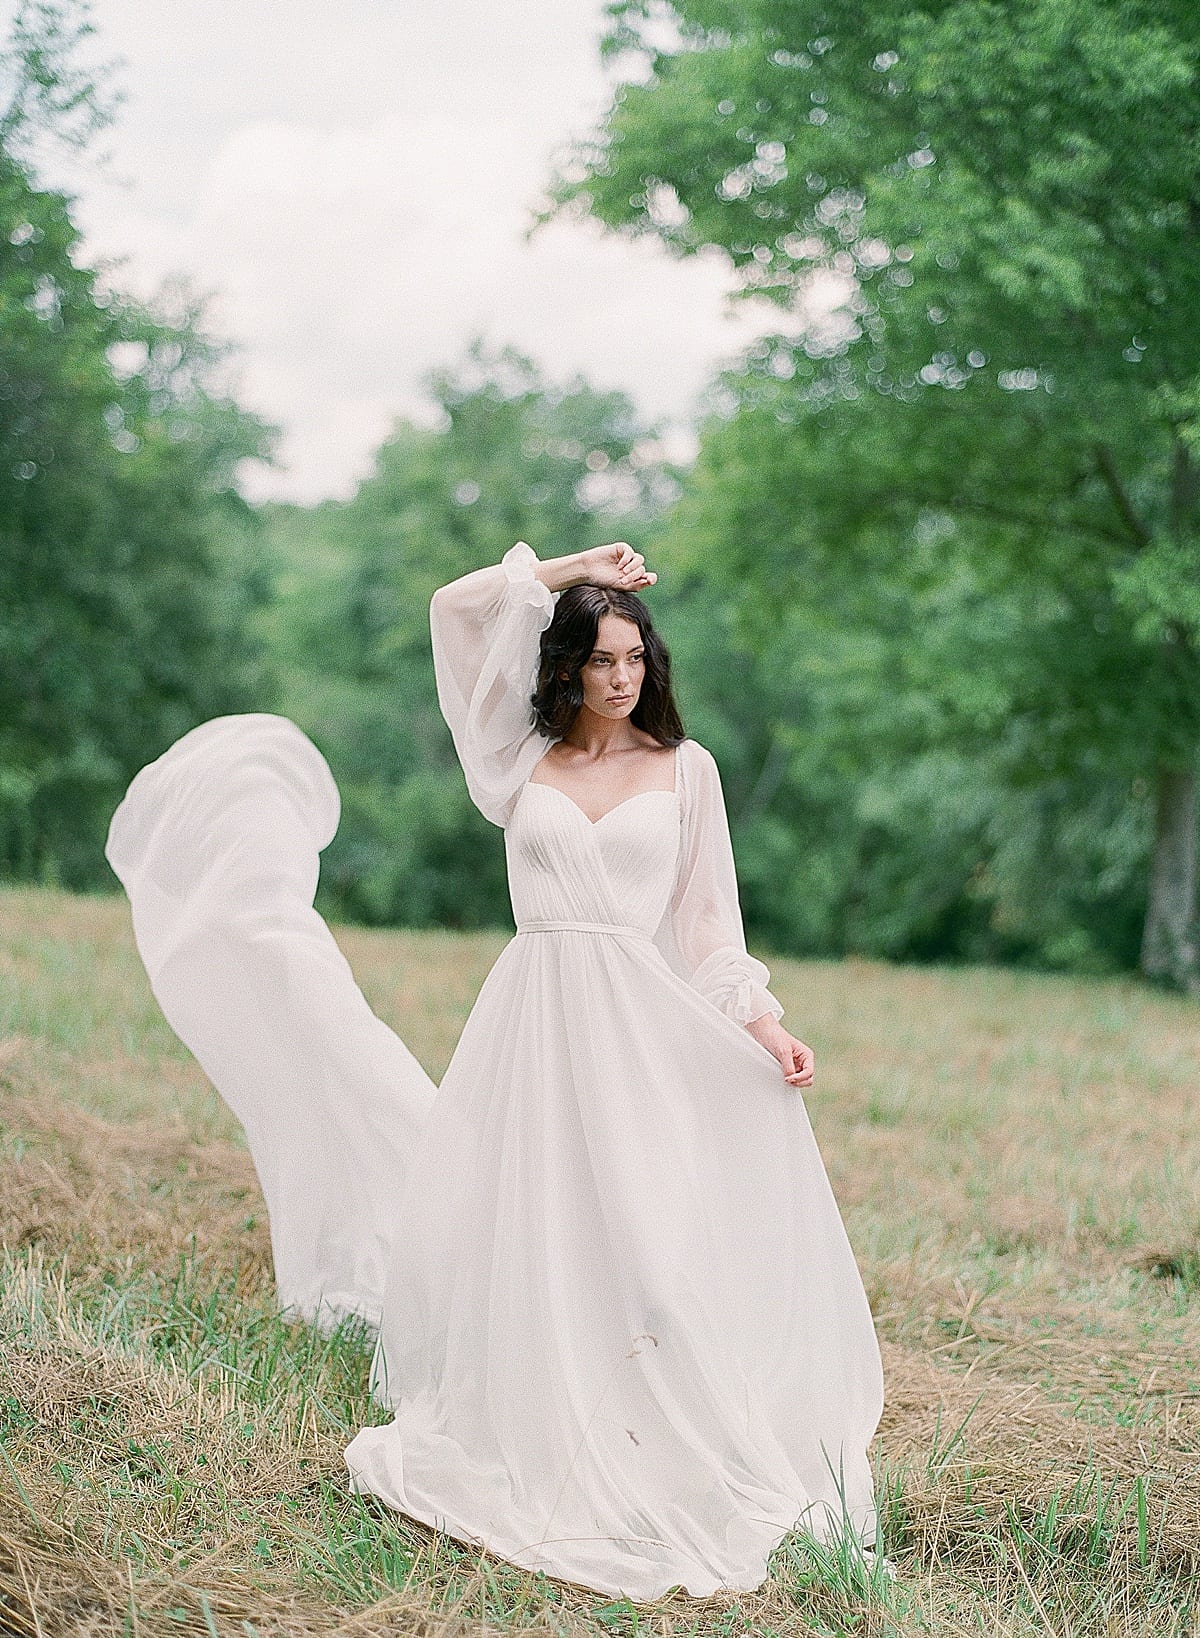 Bride with Flowing Romantic Gown Photo